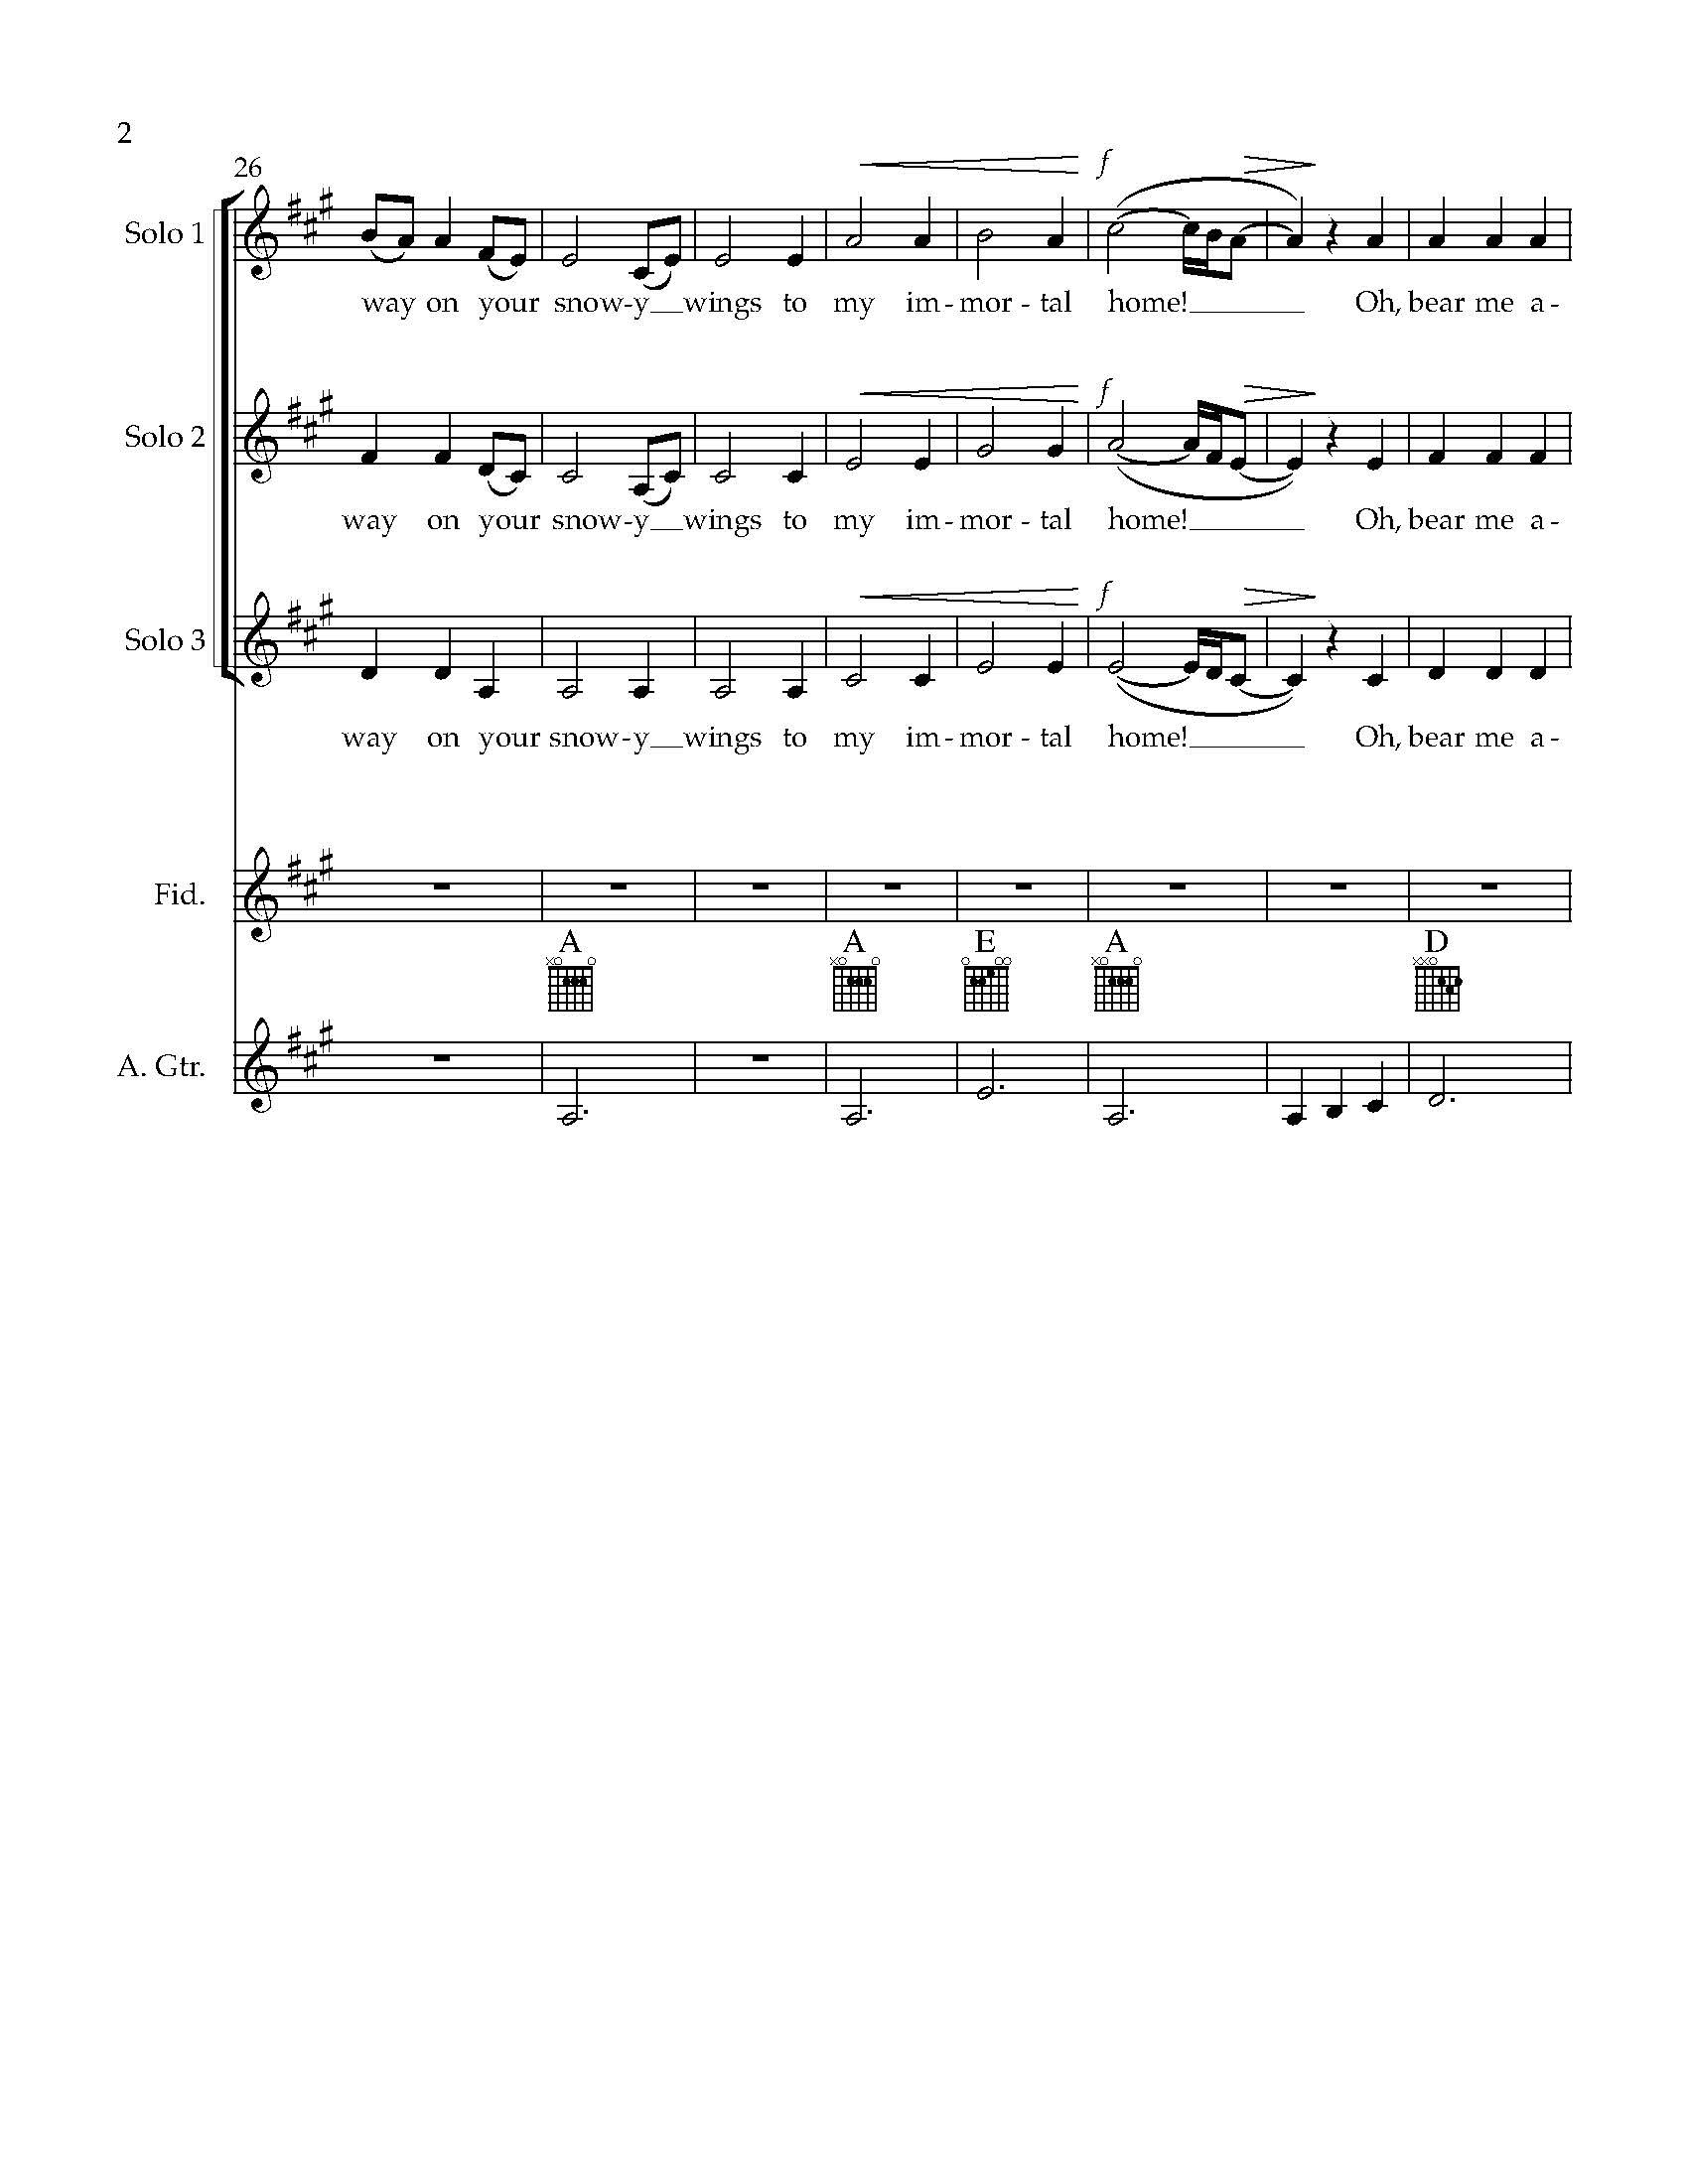 FULL SCORE preview - Angel Band for three-part choir, fiddle, piano, guitar, and bass - arr_Page_02.jpg